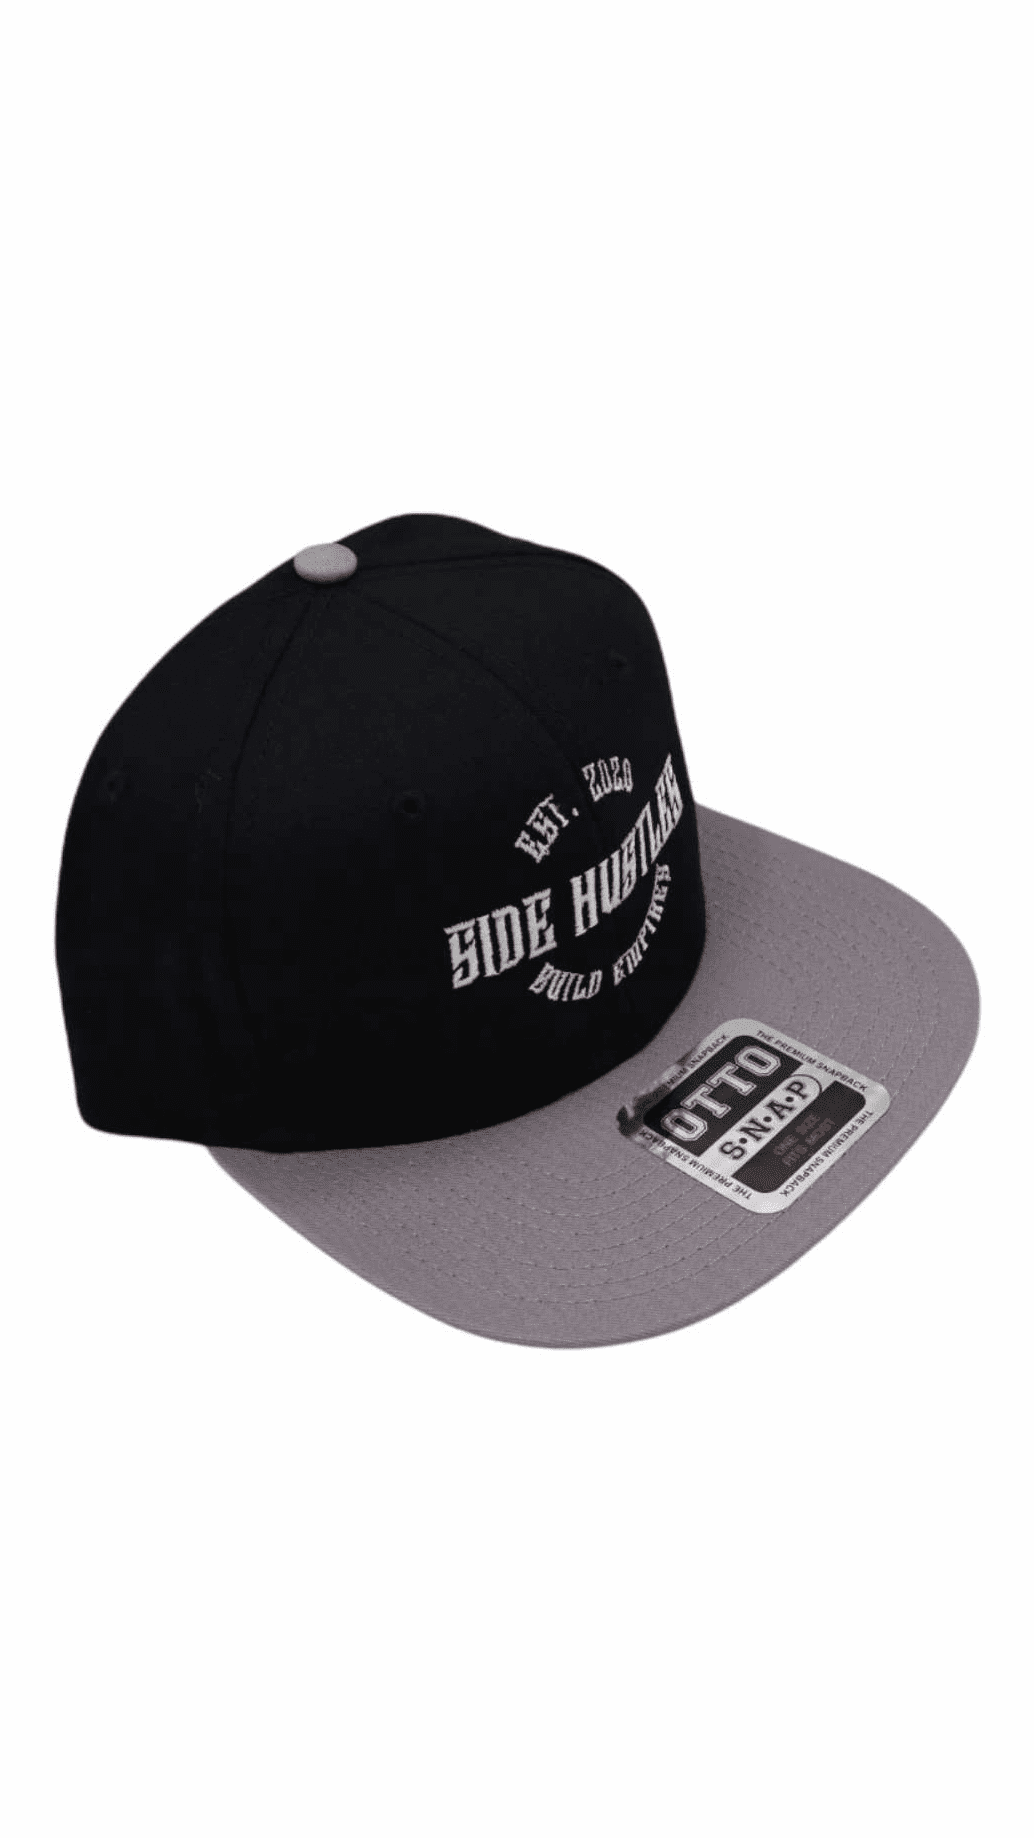 Premium black and grey 6 panel hlsnapback style hat with side hustle embroidered design on front